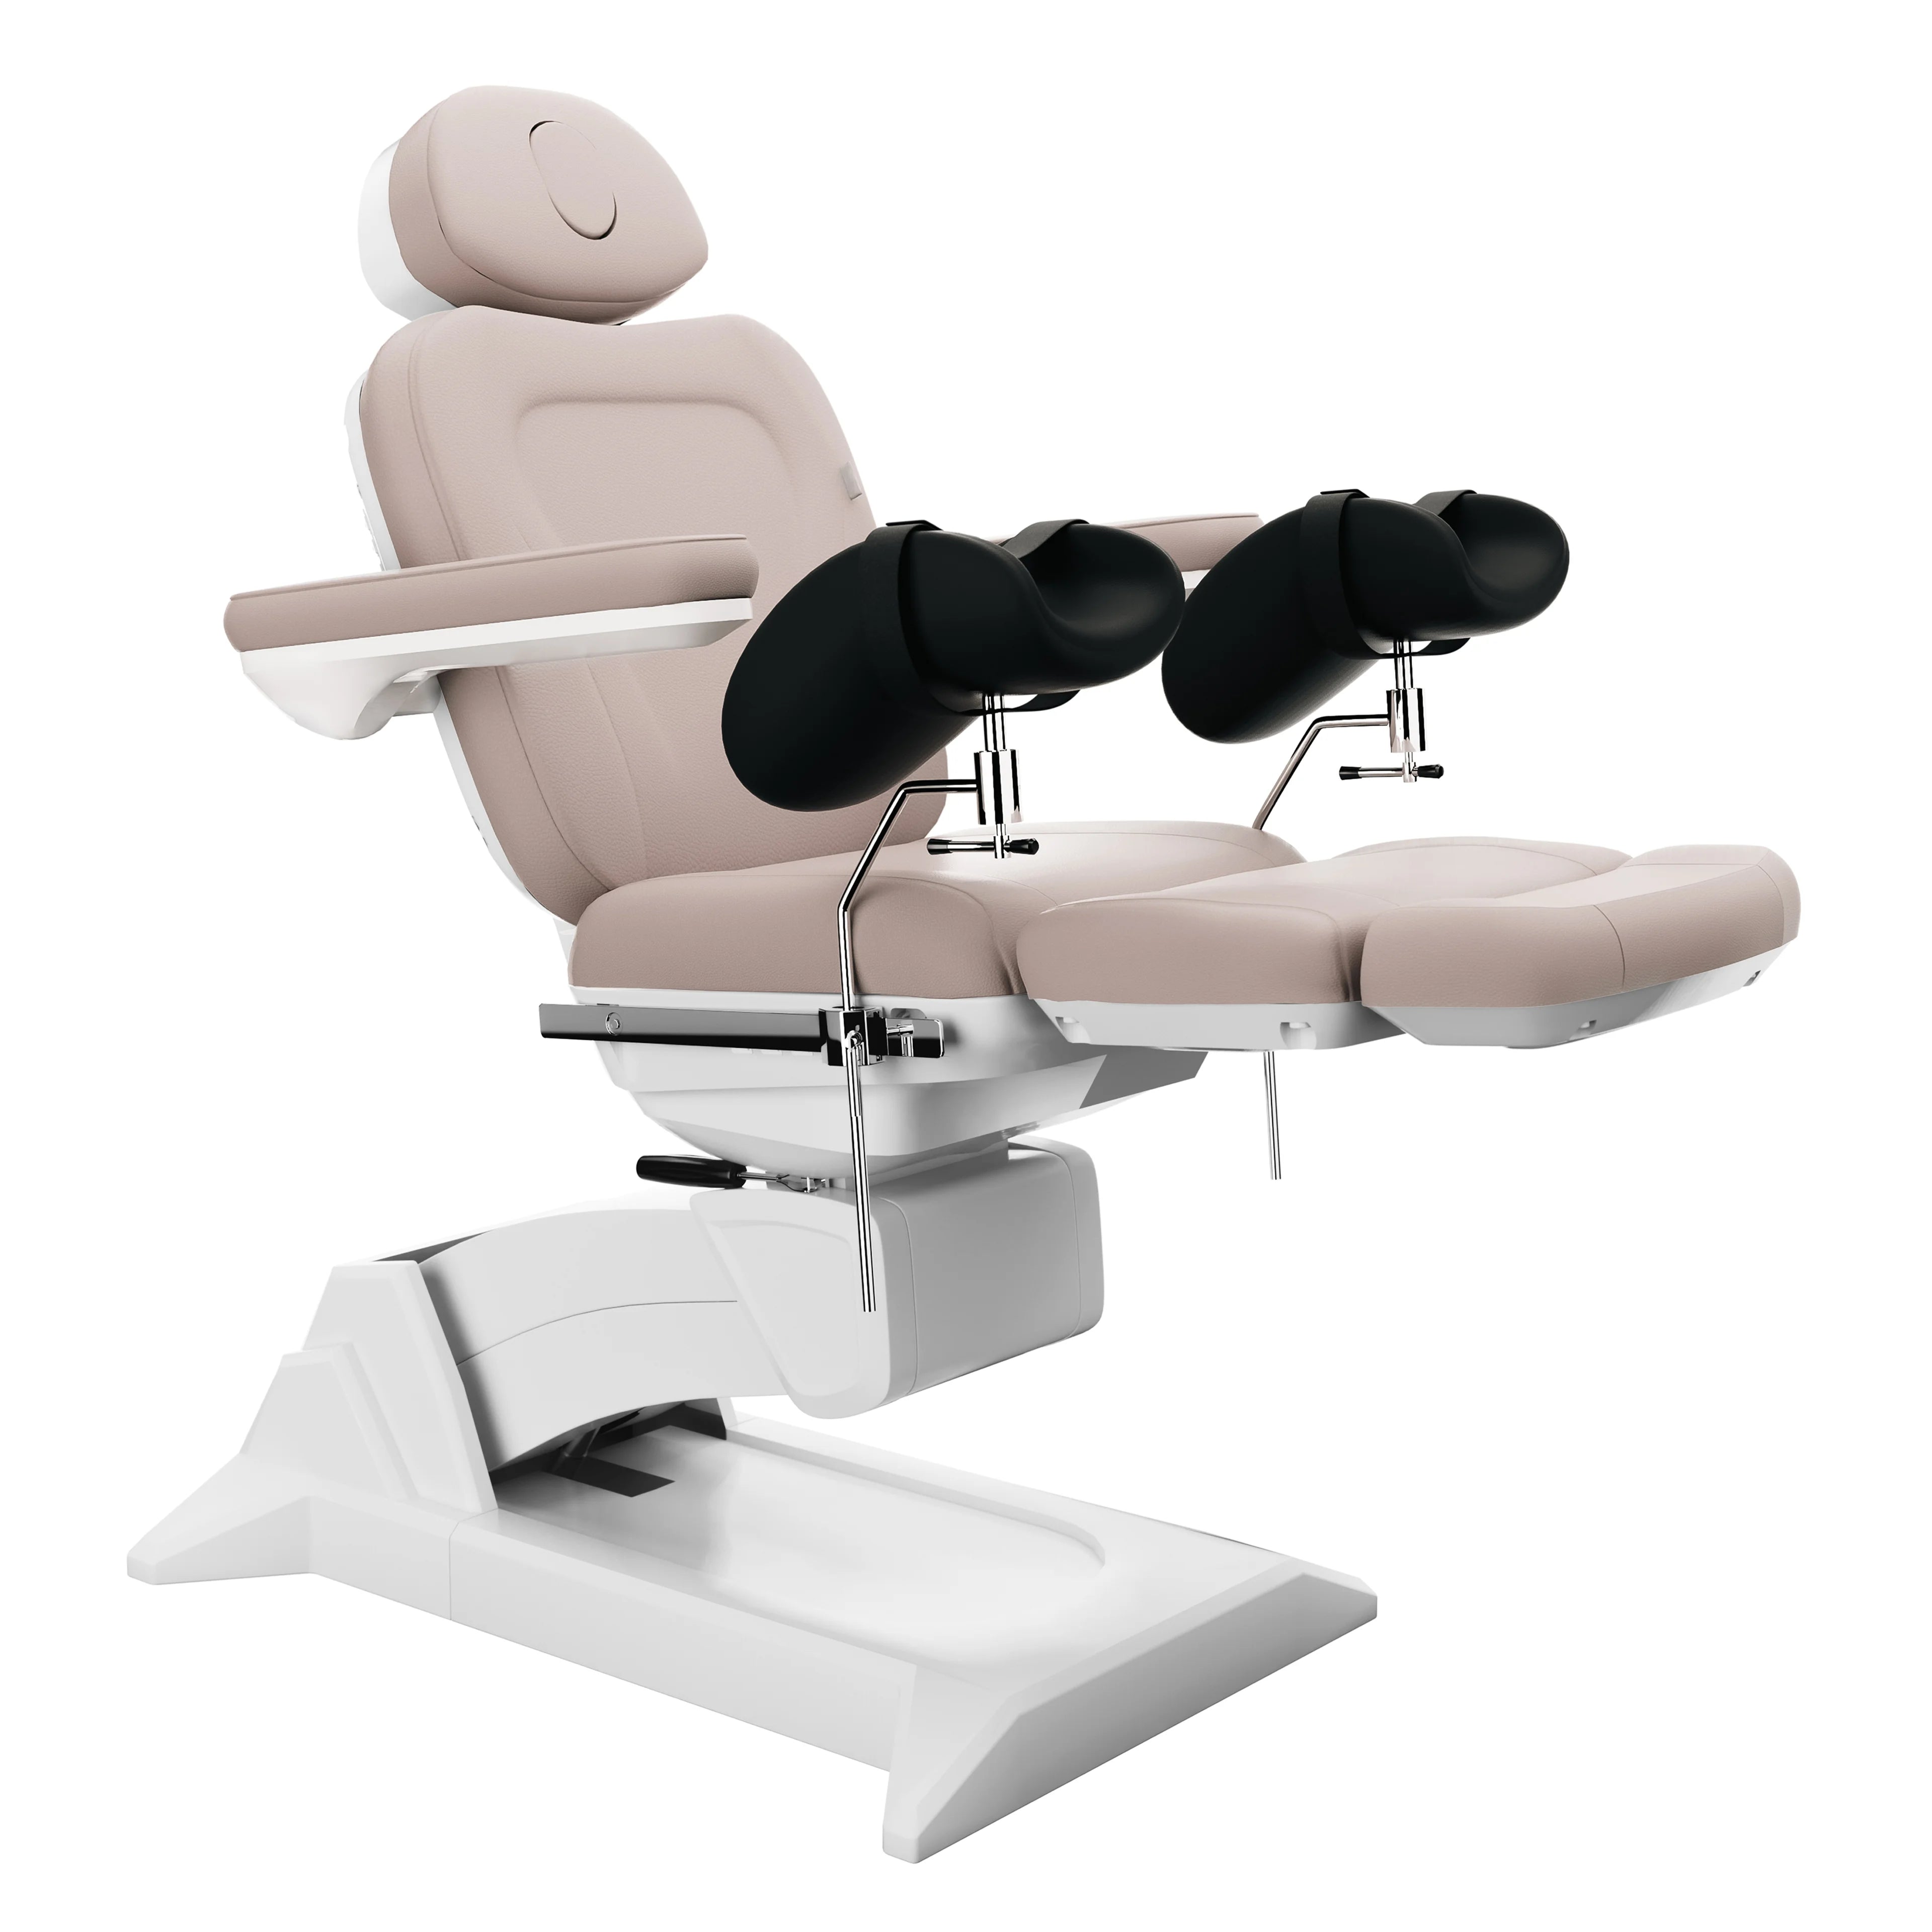 SpaMarc . Ultera (Taupe) . OBGYN & Gynecology . Rotating . 4 Motor Spa Treatment Chair/Bed